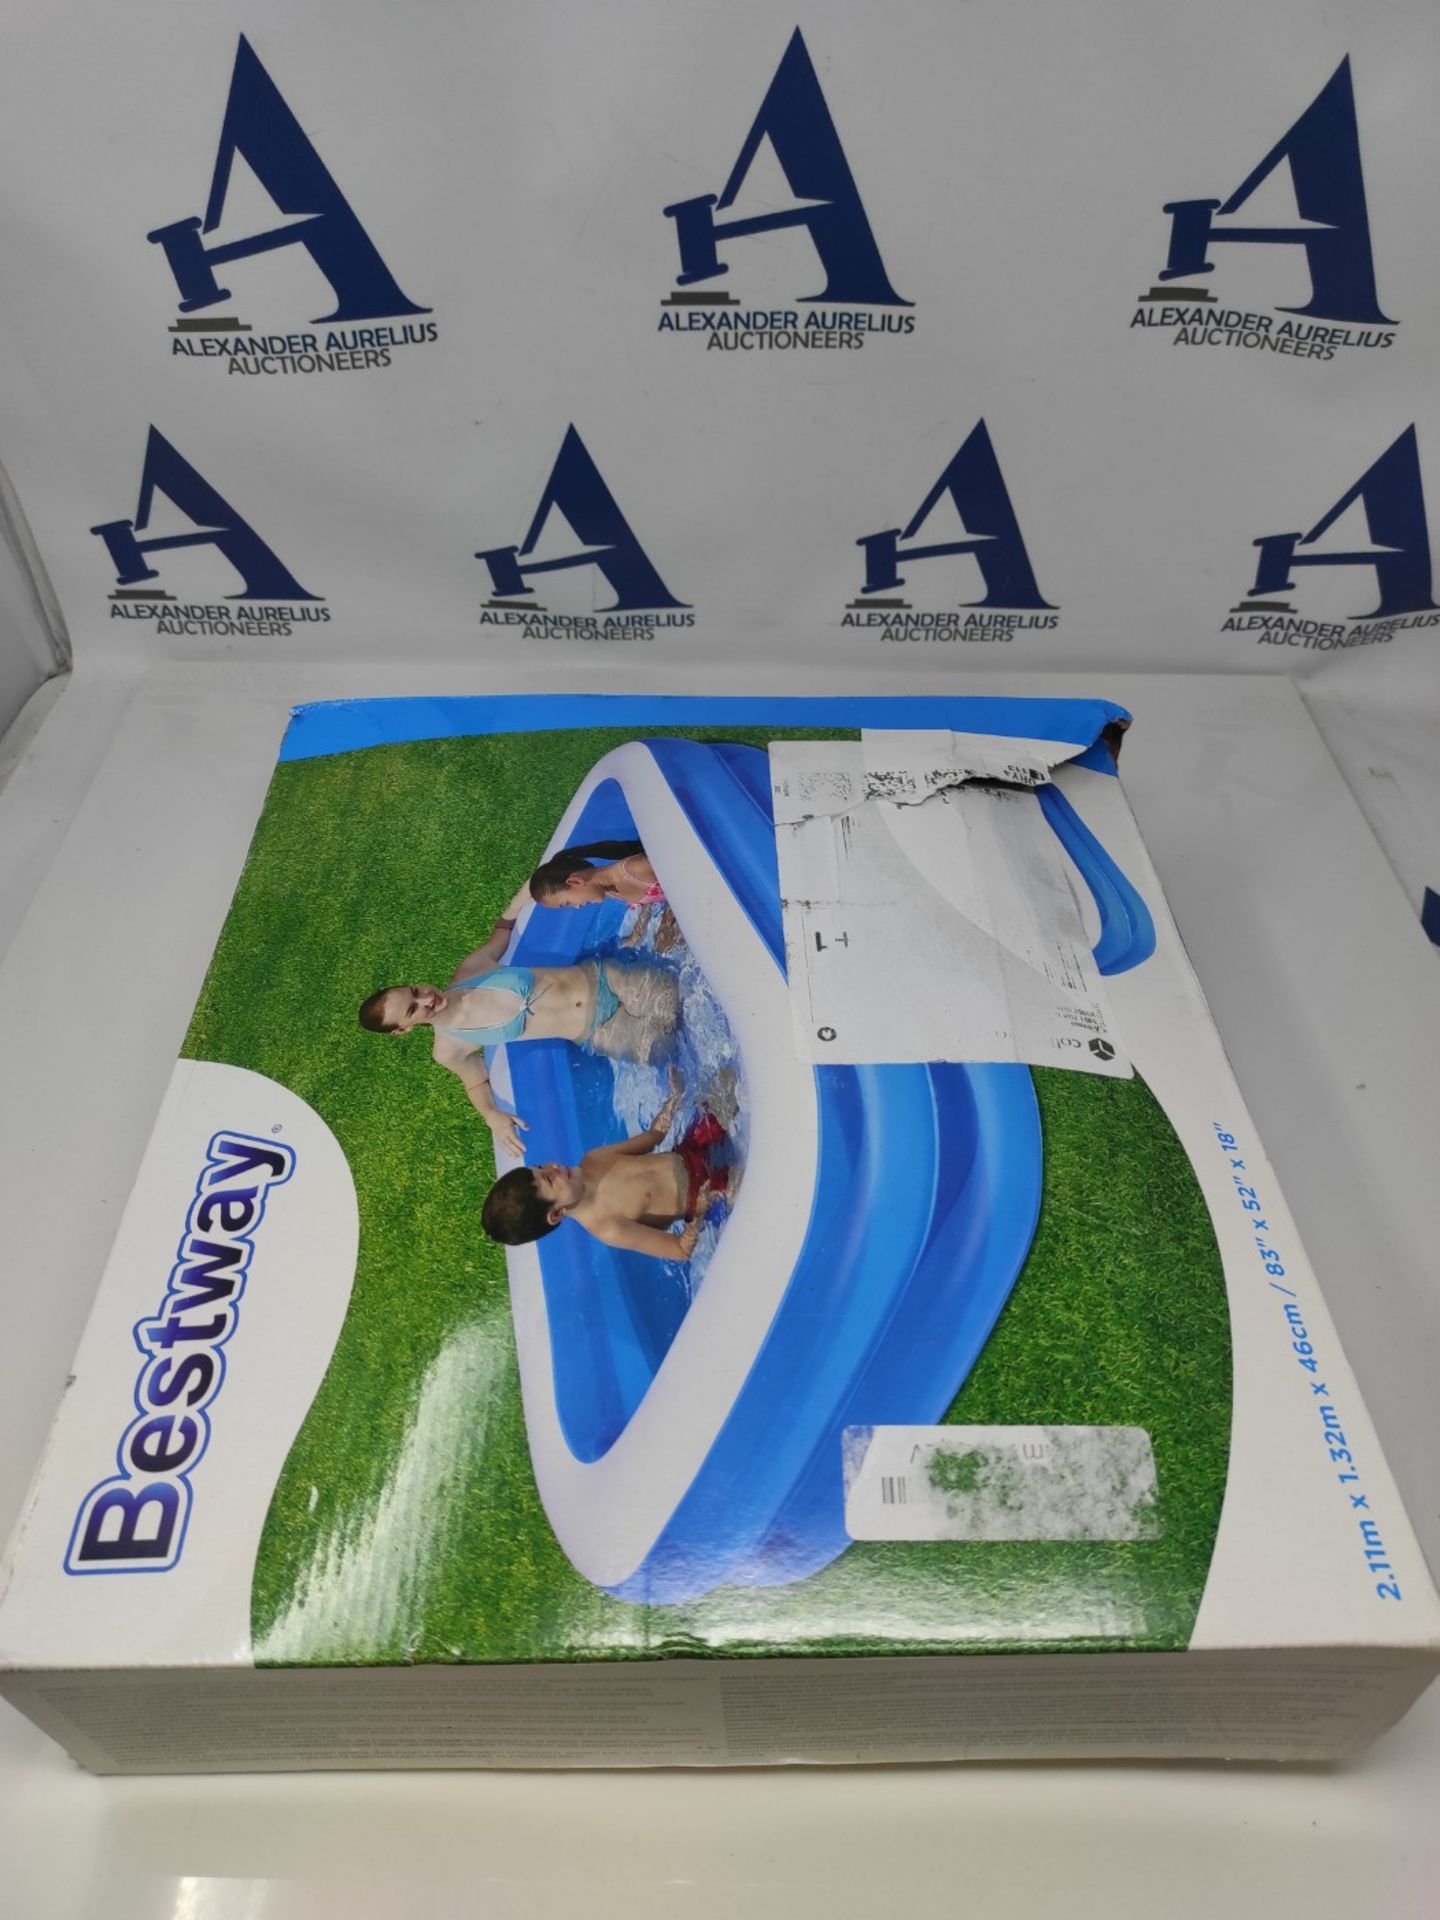 Bestway - Deluxe blue rectangular inflatable pool, 211 x 132 x 46 cm - Image 2 of 3